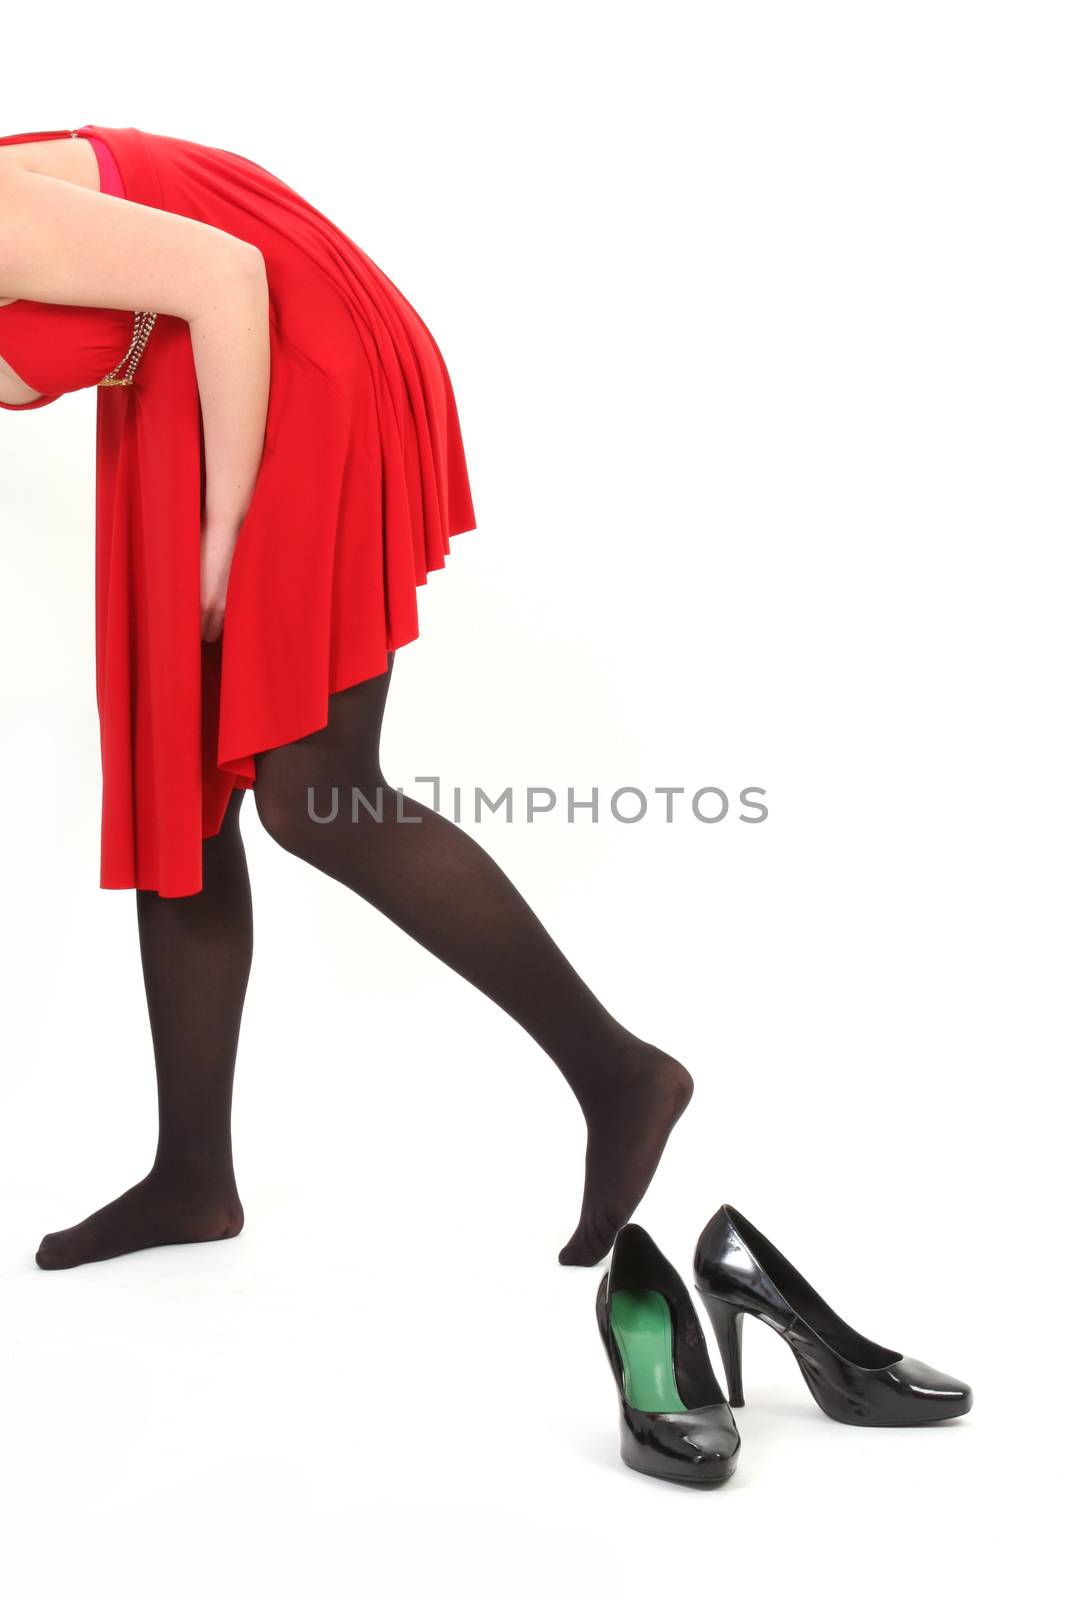 woman with red dress and back shoes on white by PeterHofstetter